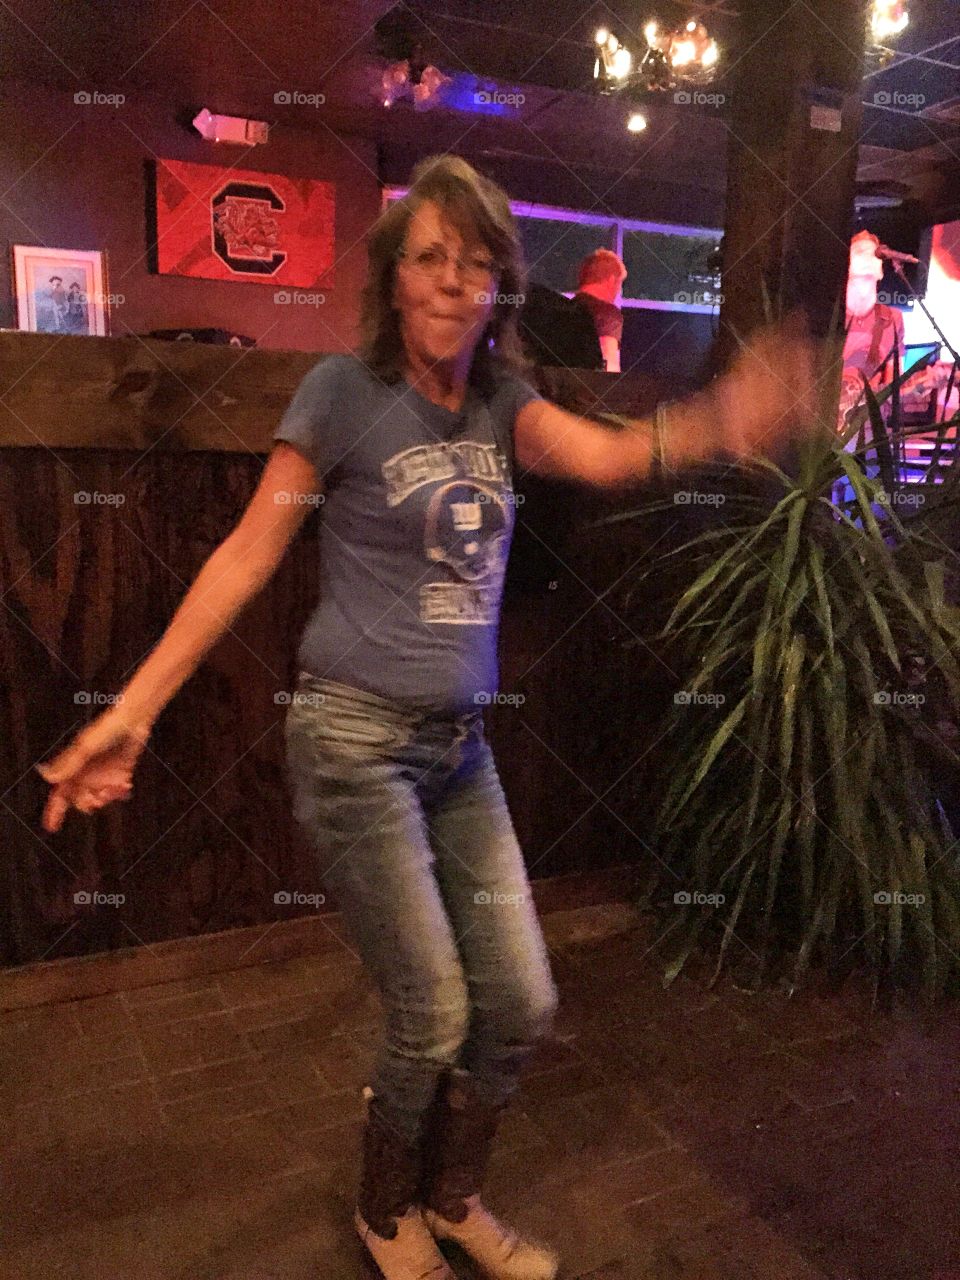 Bar dancer. A far out lady dancing in one of my local dive bars.